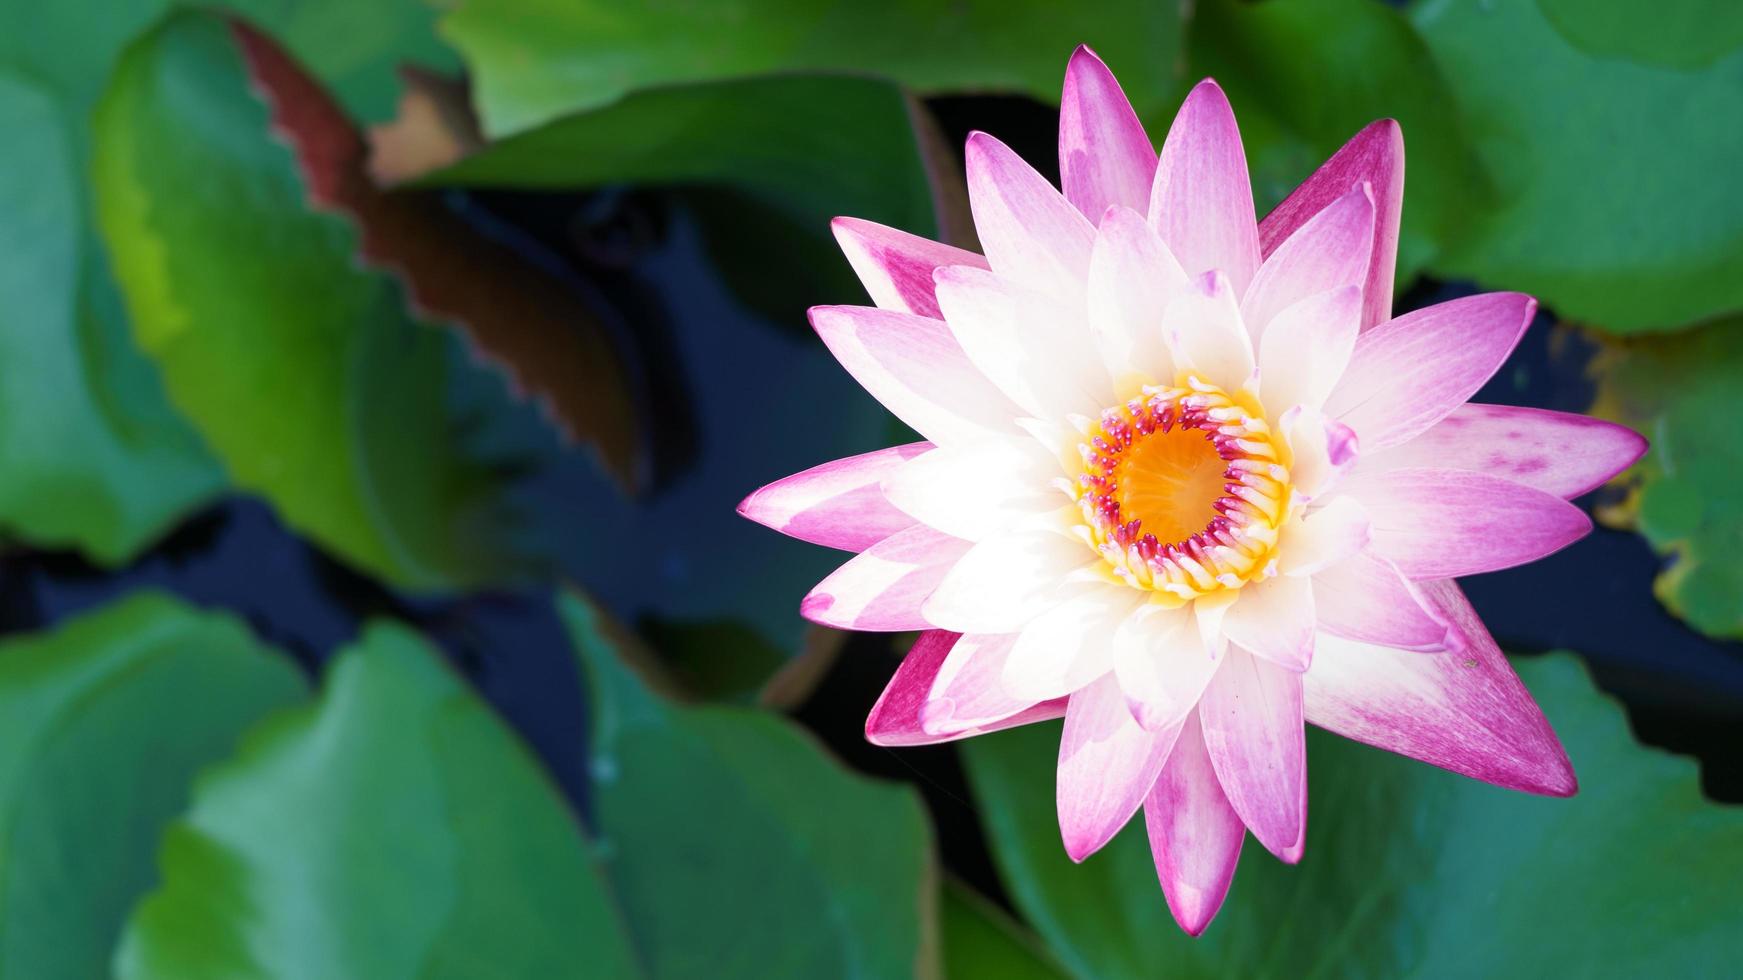 The beauty of lotus flowers blooming in white and purple on the pond.water lily, peace, beauty of nature, is the flower of Buddhism. photo